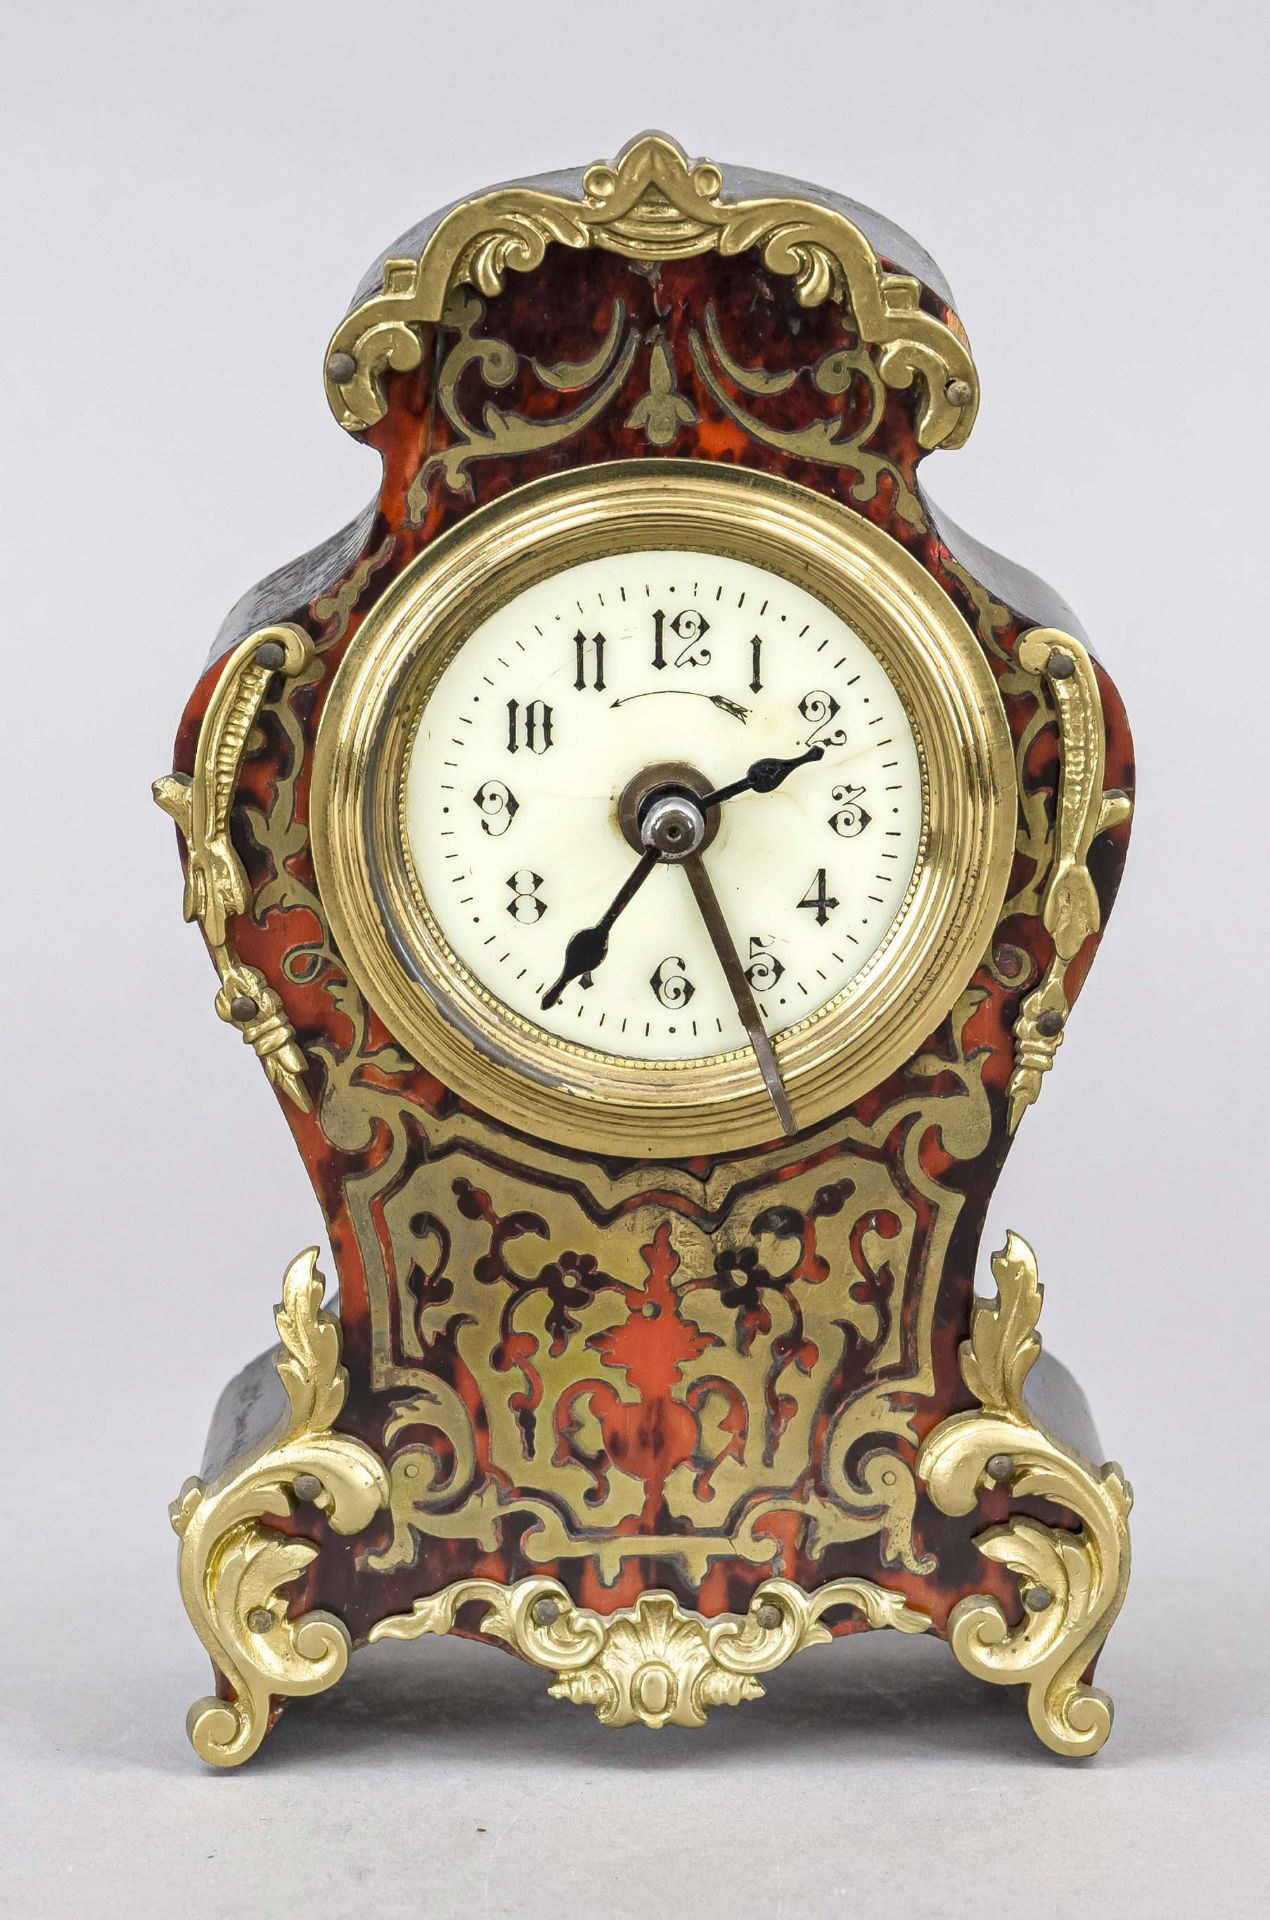 small table clock/alarm clock Boulle-style, probably France, around 1900, wooden body with brass